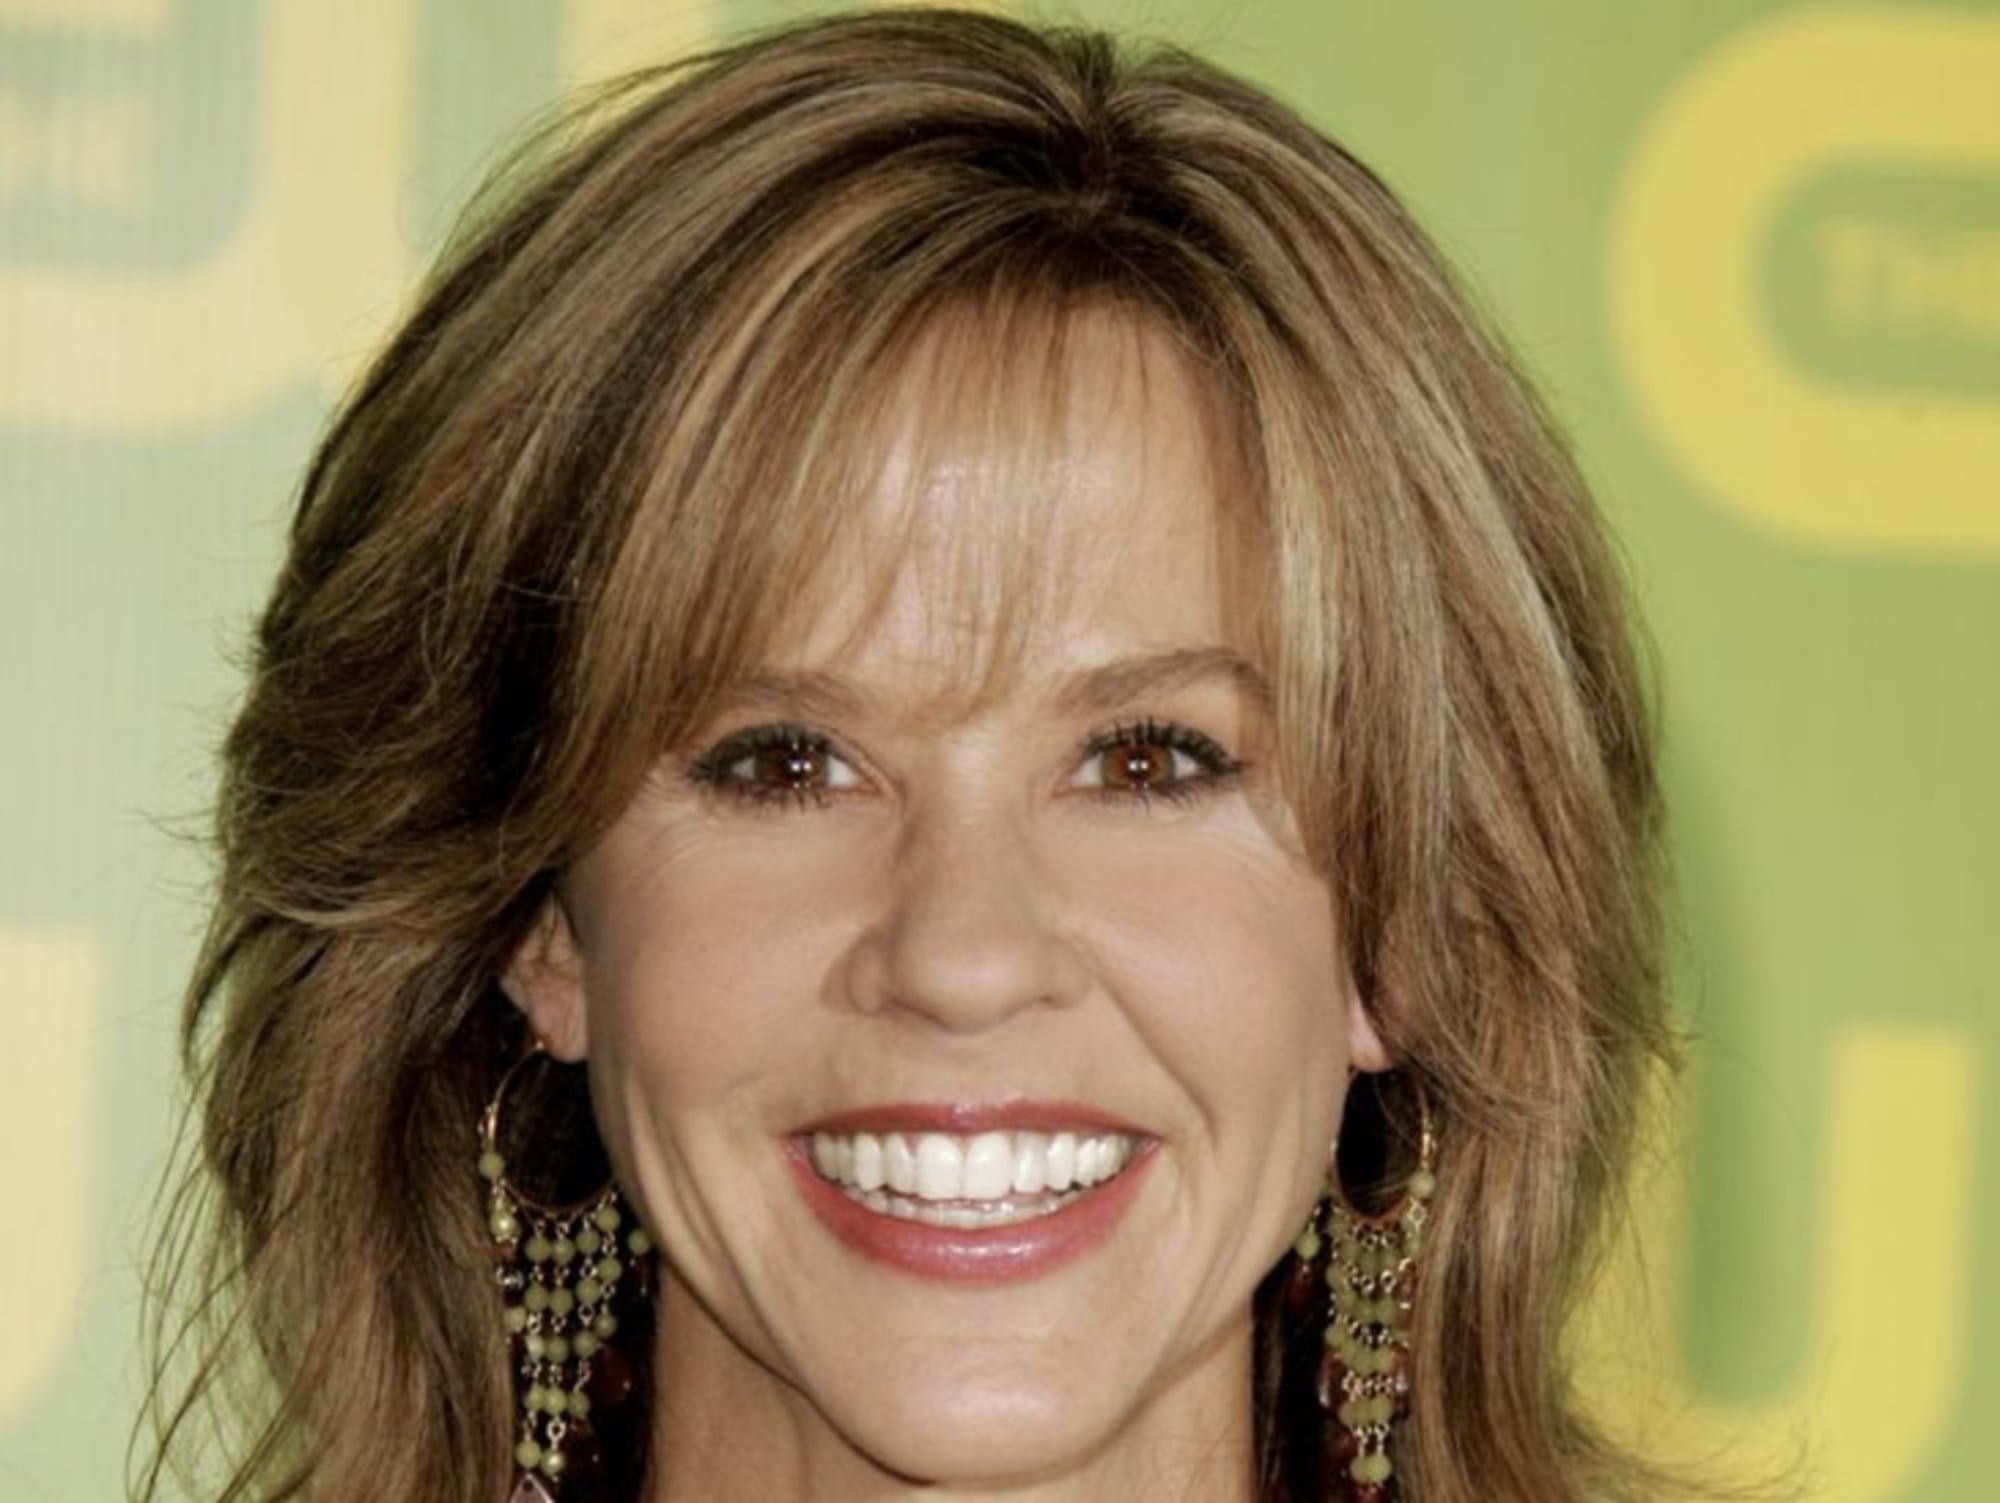 Exclusive: Linda Blair on the 50th anniversary of The Exorcist and championing animal welfare